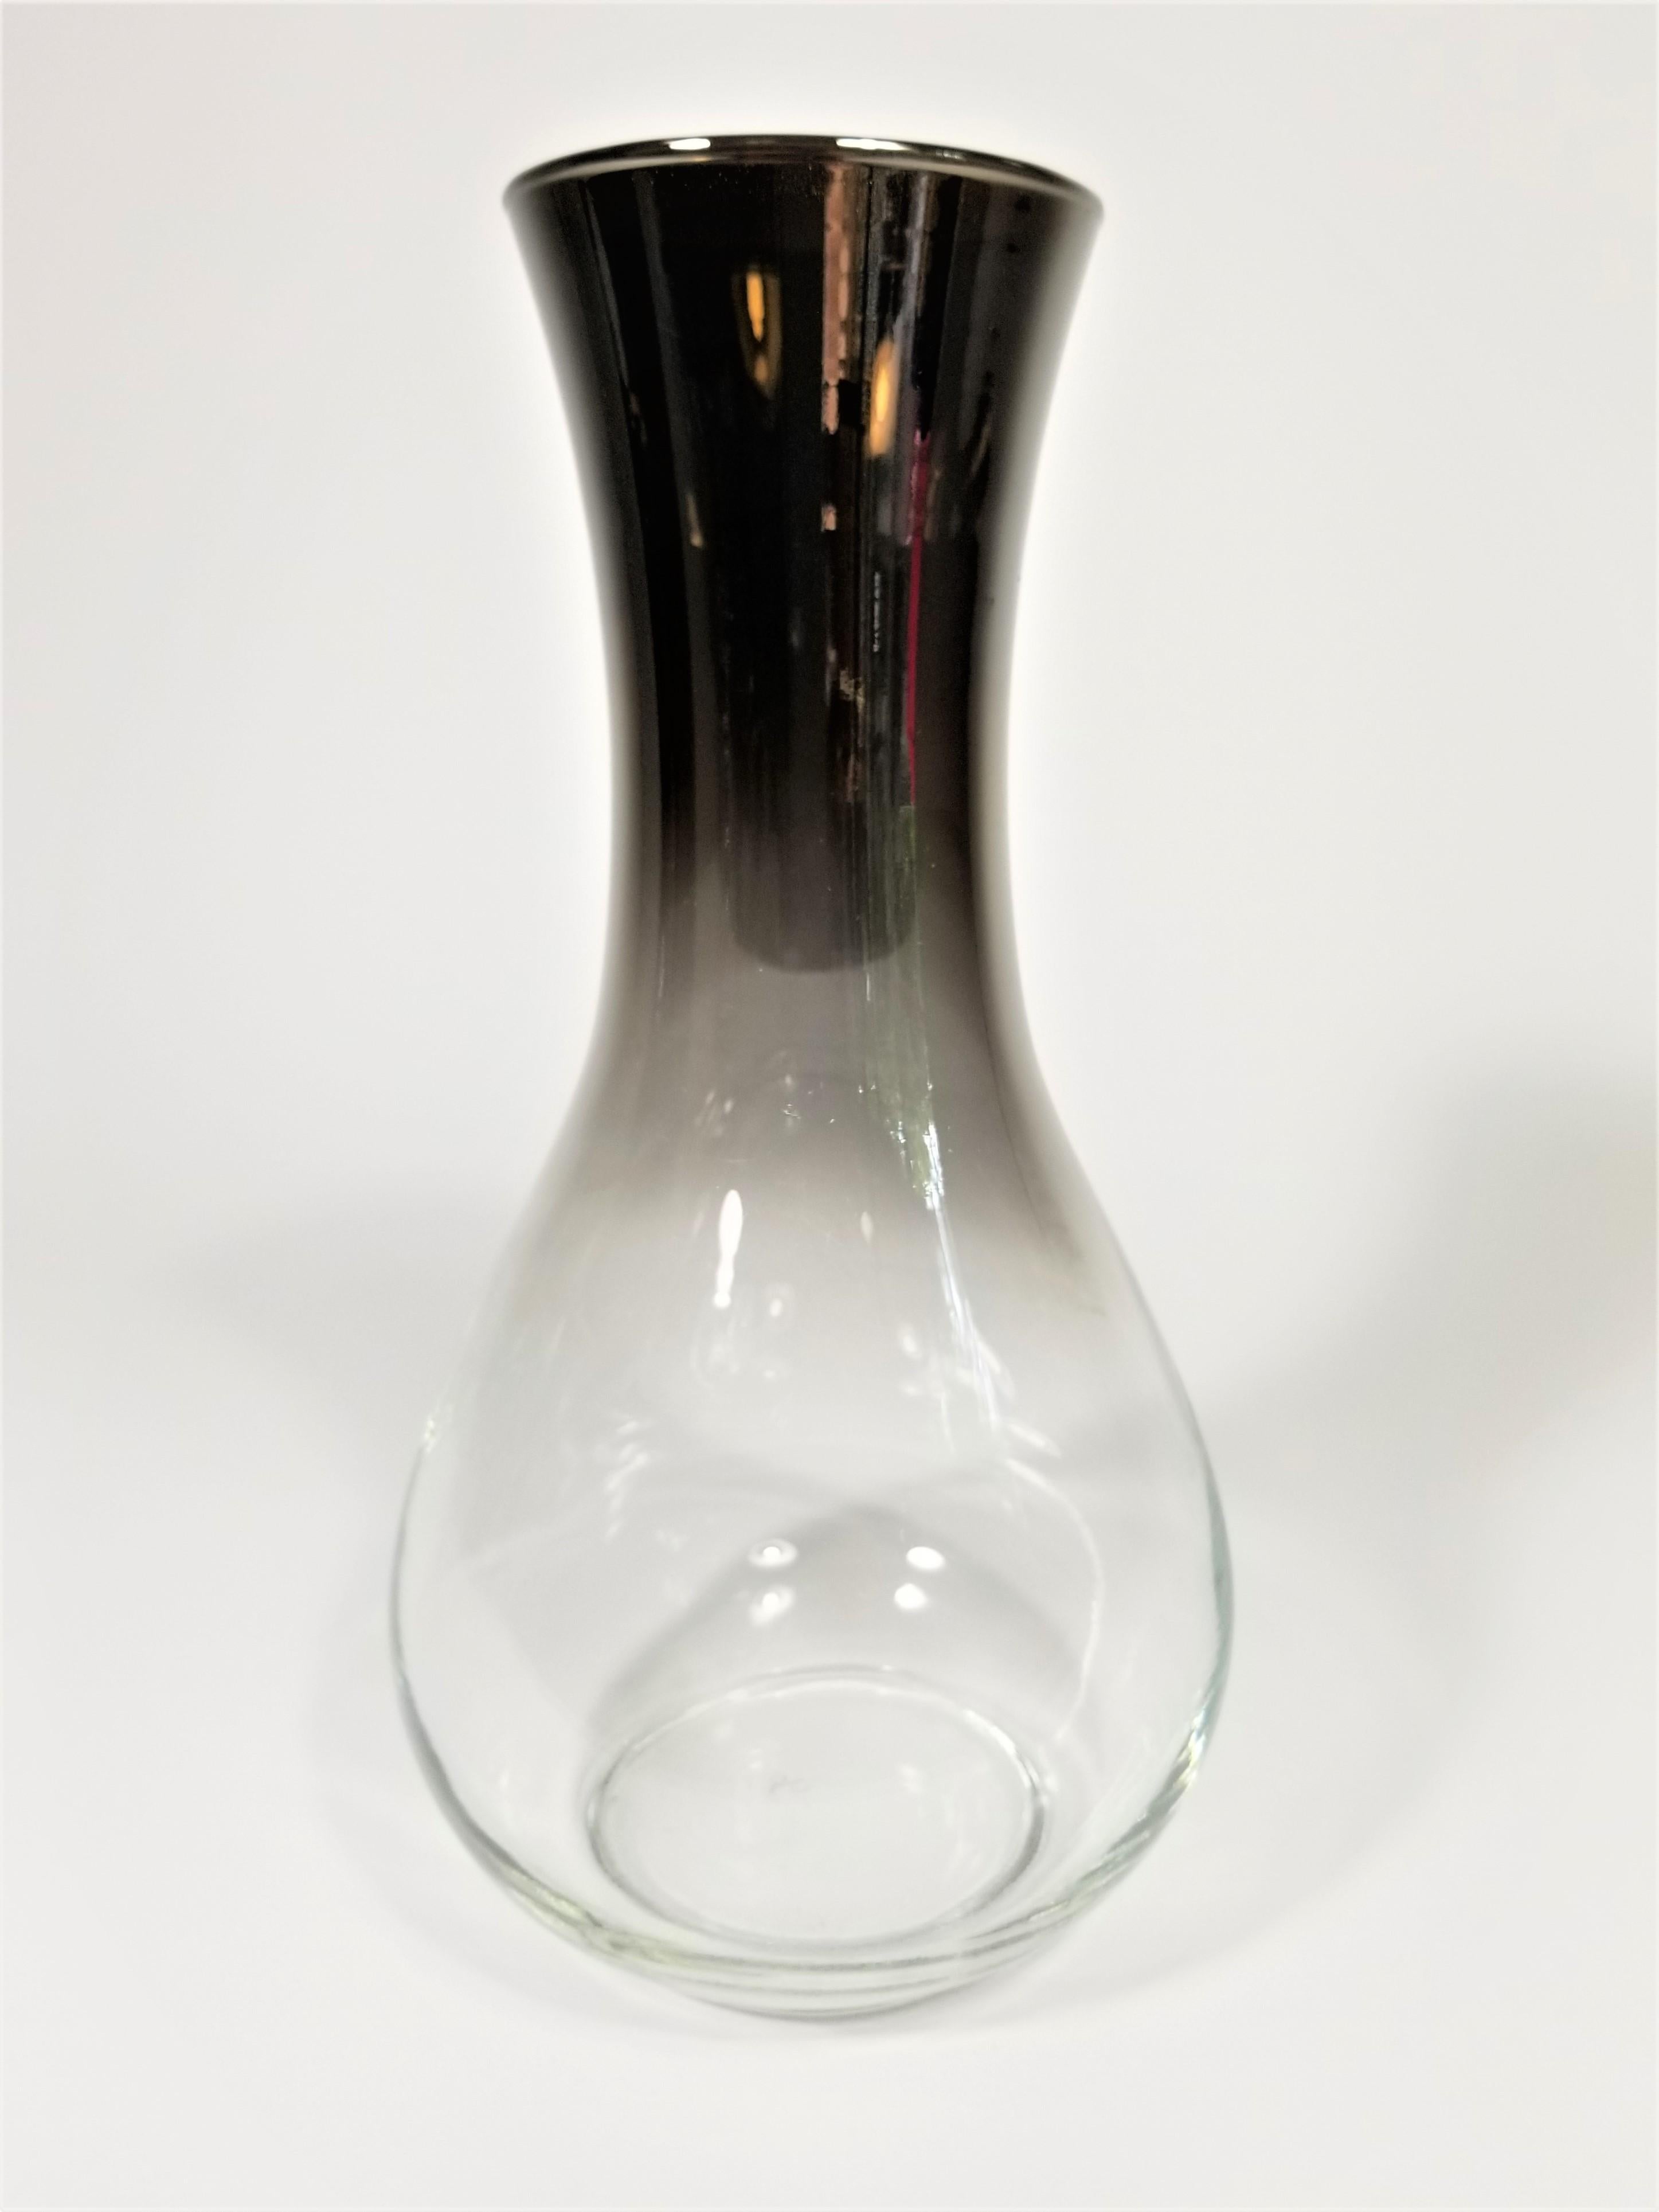 Midcentury Dorothy Thorpe style carafe with silver fade by Libbey glass company. Although originally designed to be a carafe could serve dual purpose as a vase.
Measurements:
Height: 9.5 inches
Diameter at Top: 3.5 inches
Diameter: 5 inches.
 